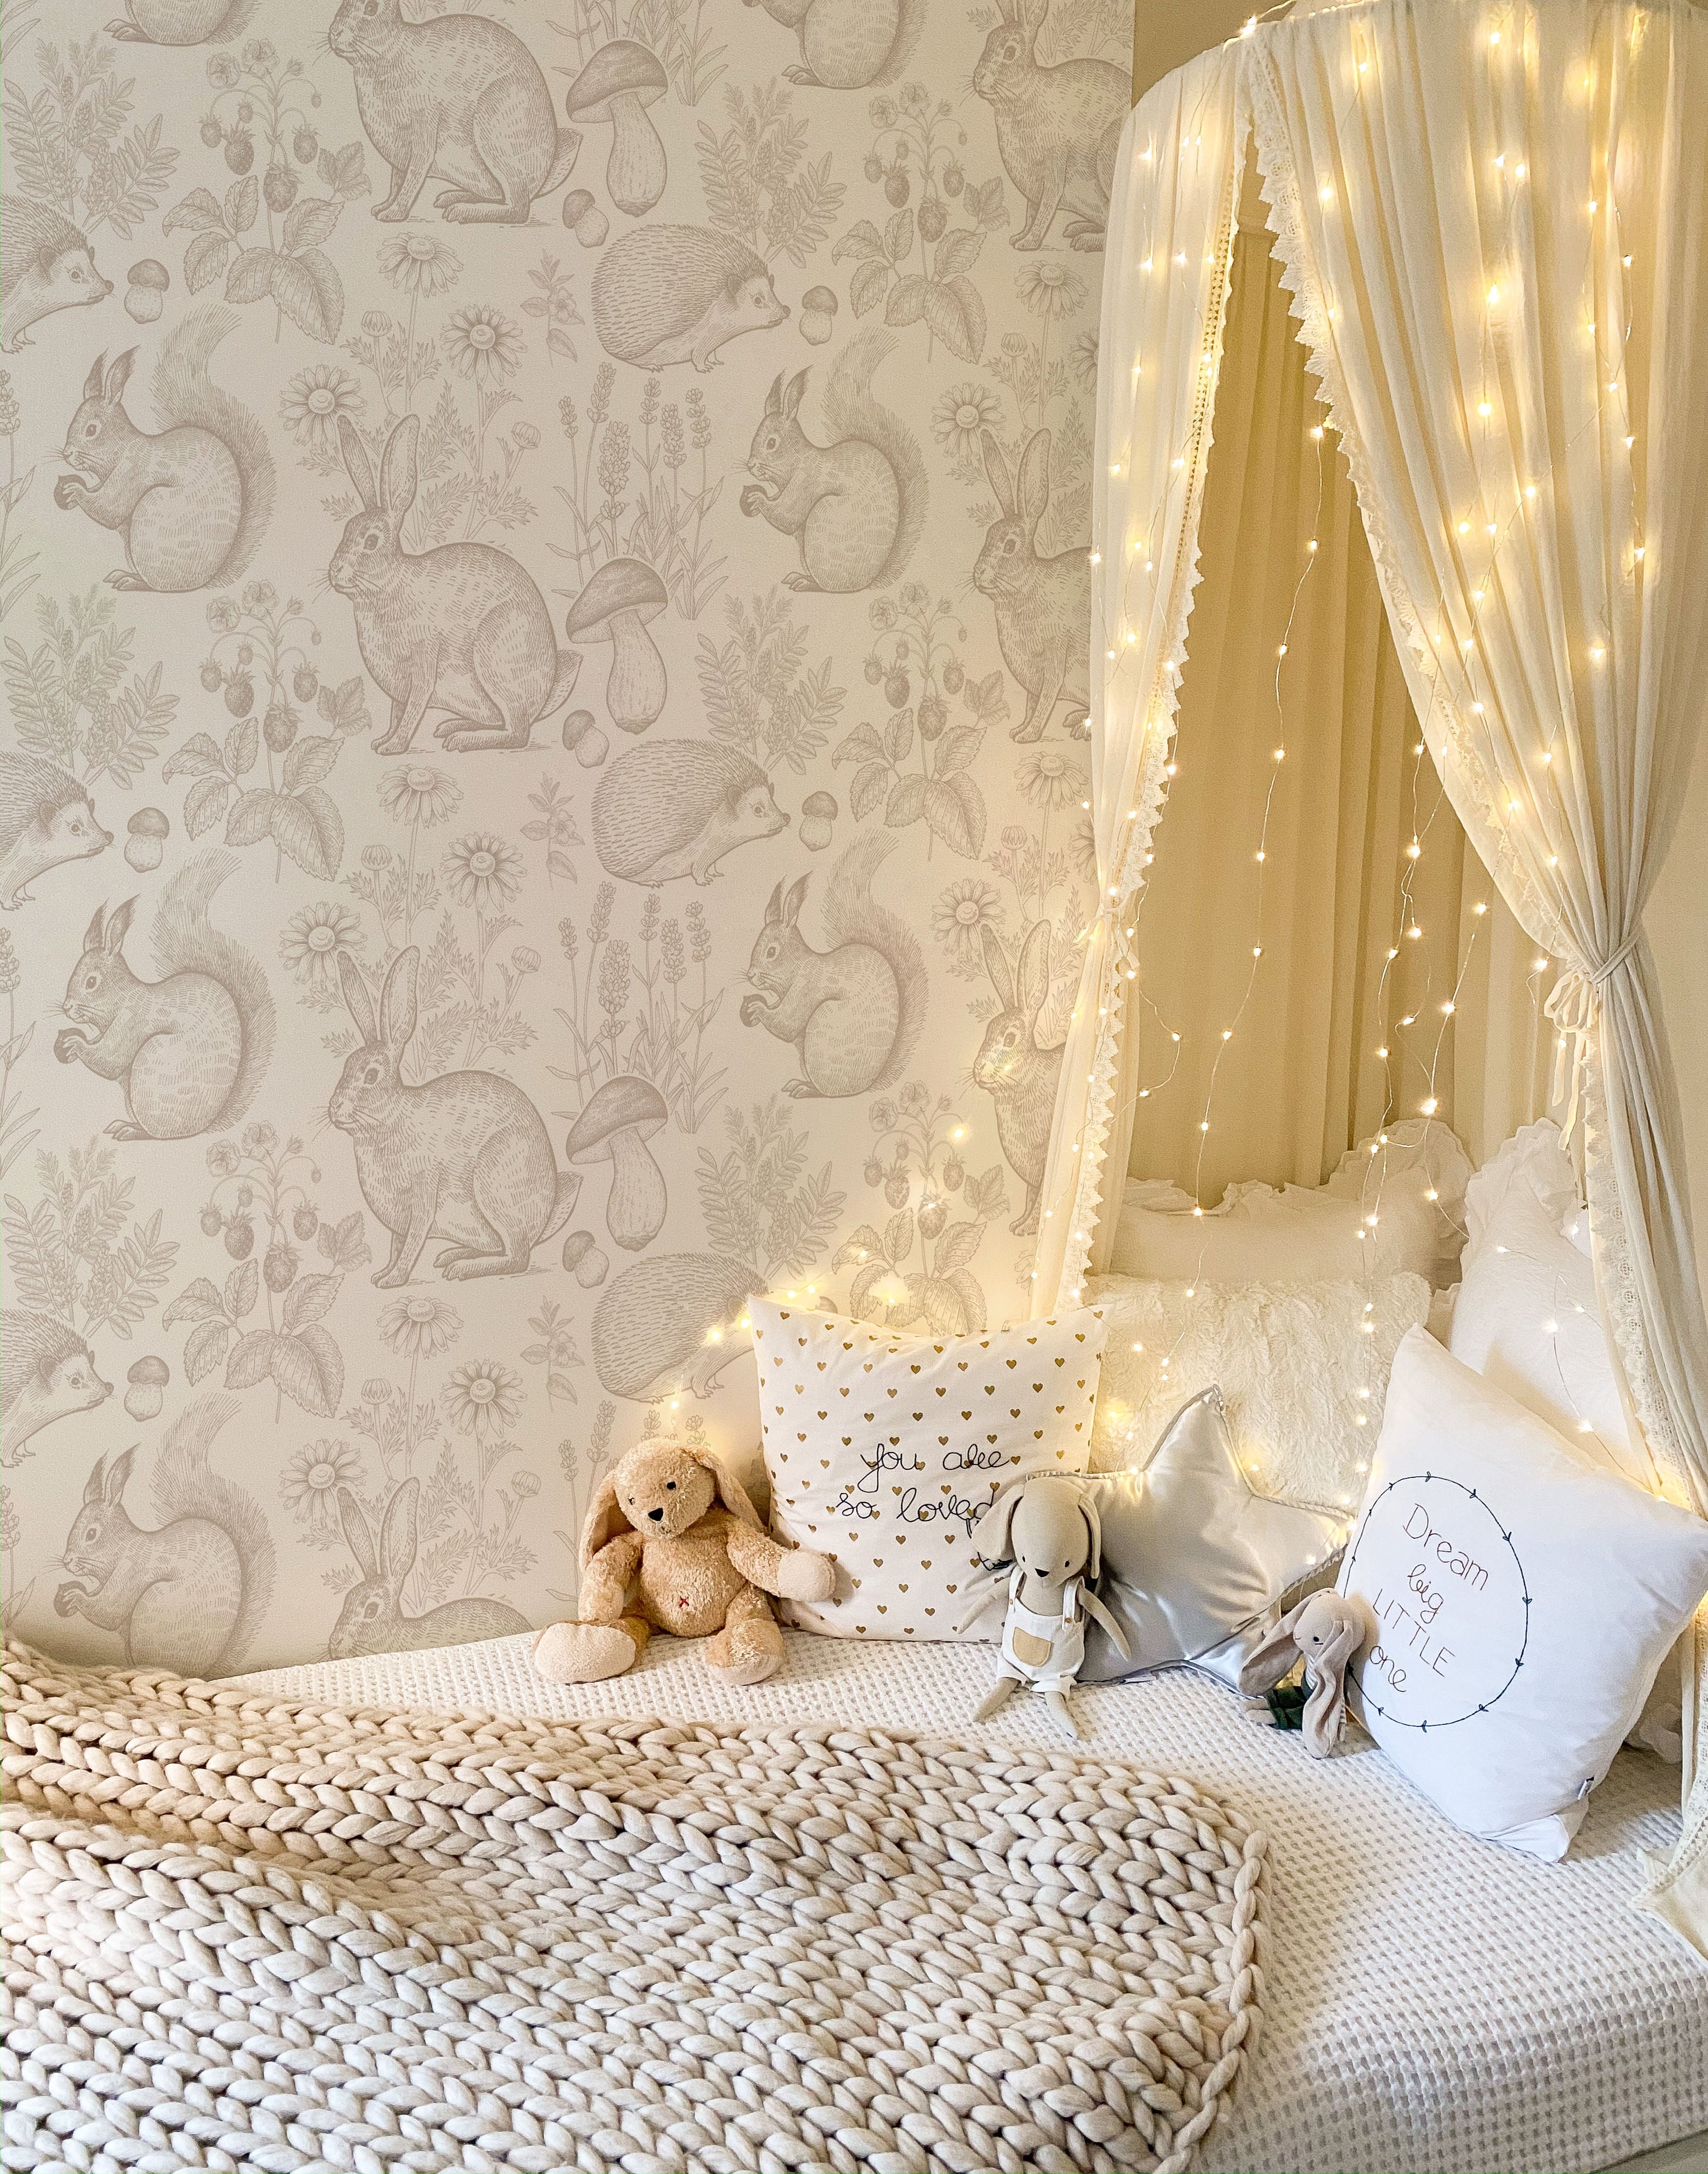 A cozy children’s nook adorned with the "Woodland Creatures Wallpaper - Beige," featuring a charming array of hand-drawn forest animals like rabbits, hedgehogs, and squirrels. The scene is complete with a bed draped in fairy lights, fluffy pillows, and plush toys, creating a whimsical and inviting space for a child.